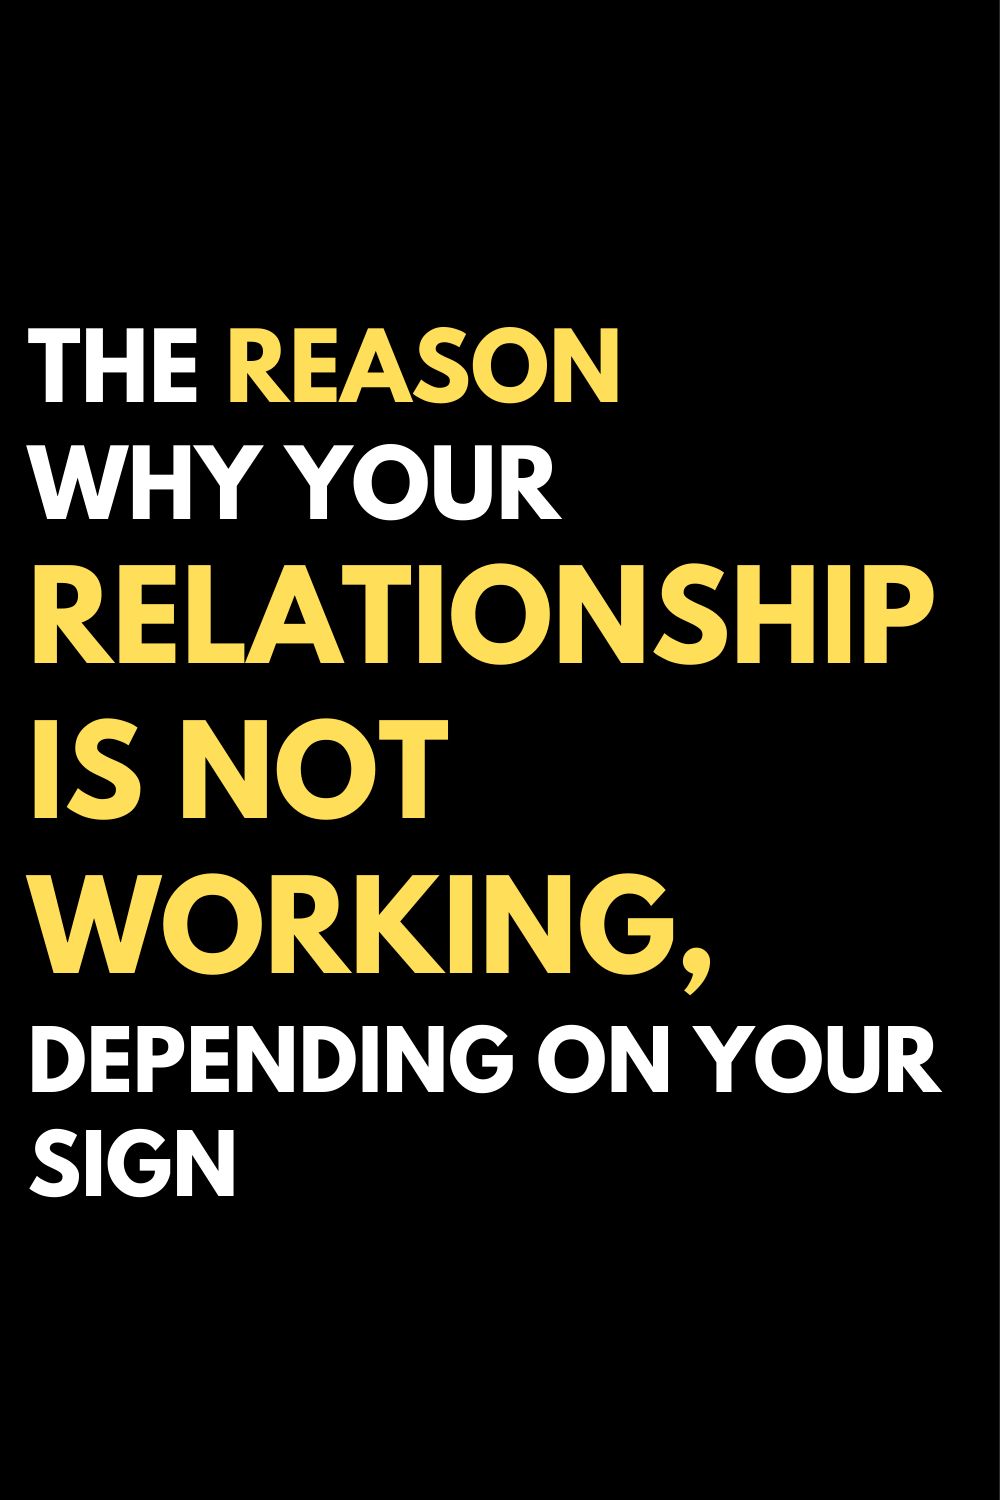 The reason why your relationship is not working, depending on your sign